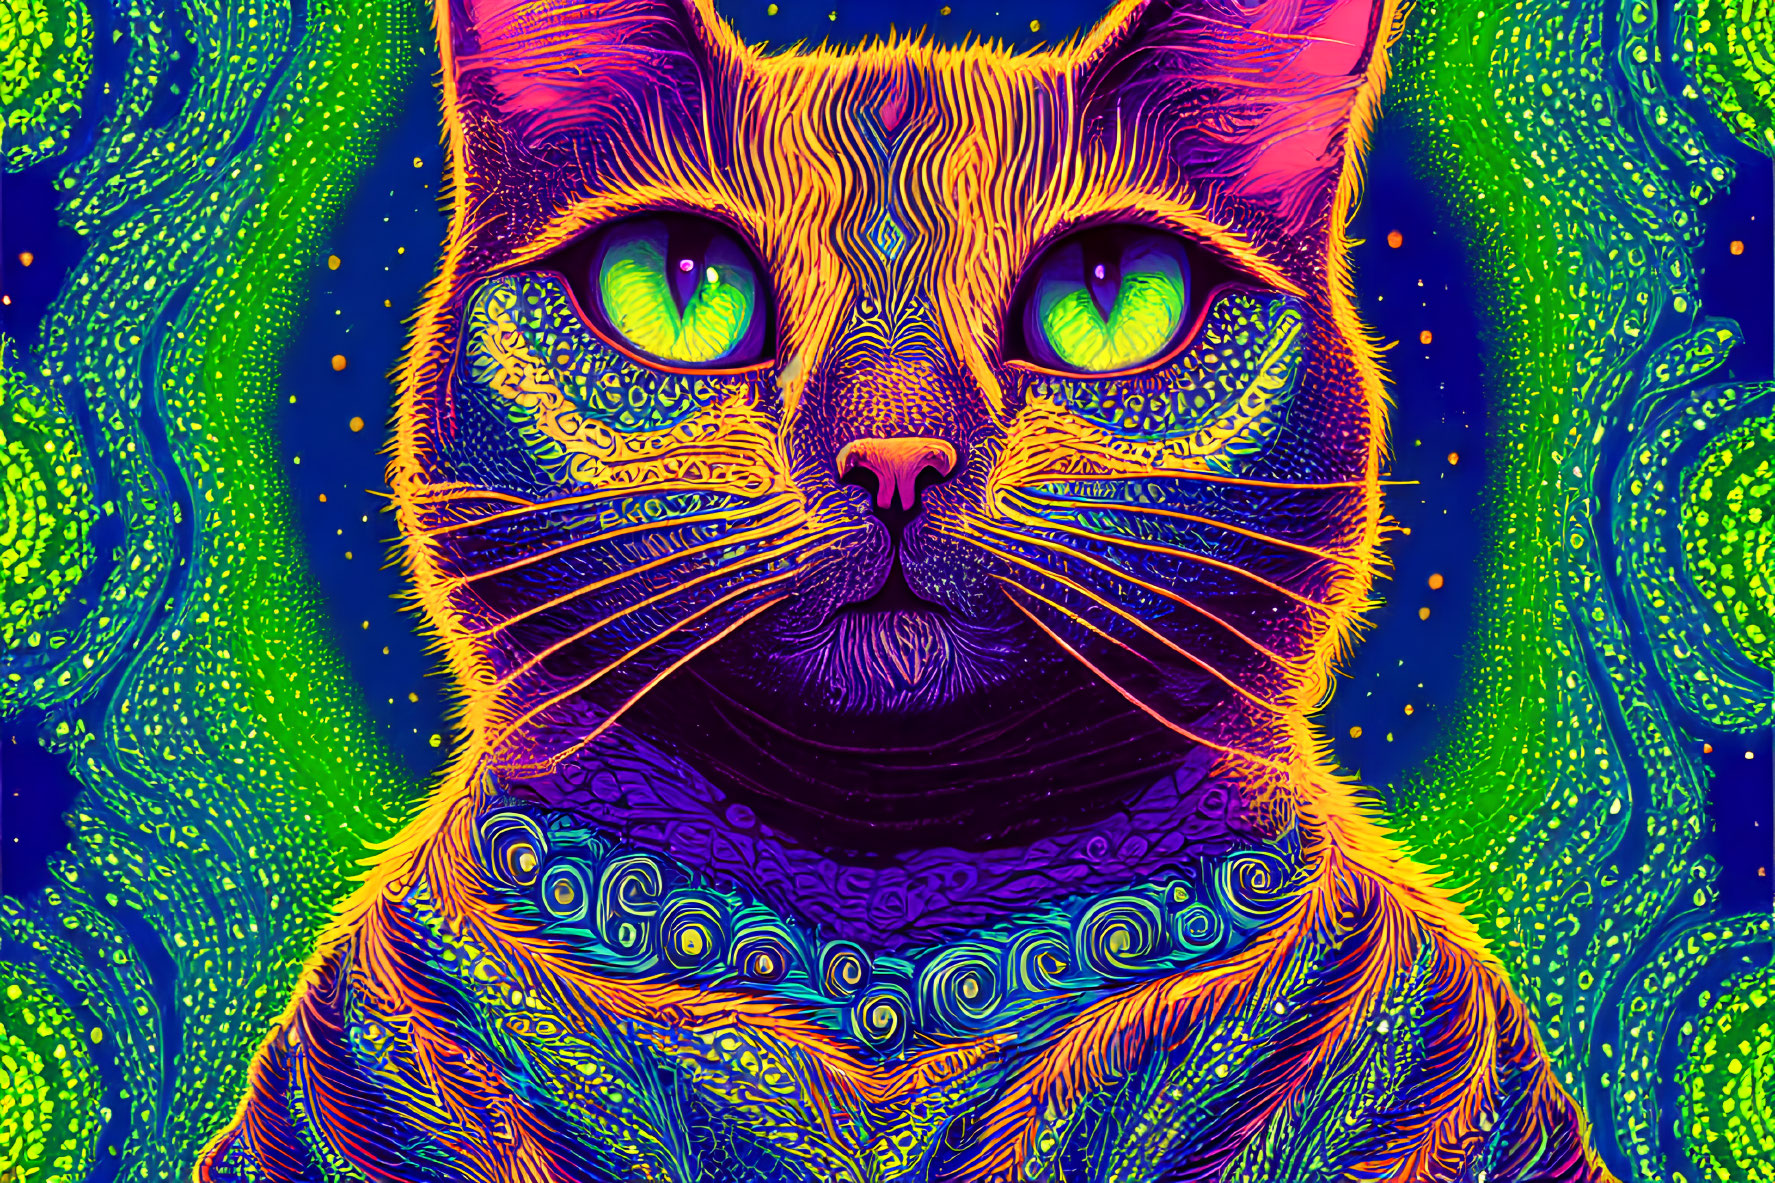 Colorful Psychedelic Cat Portrait with Green Eyes on Cosmic Background